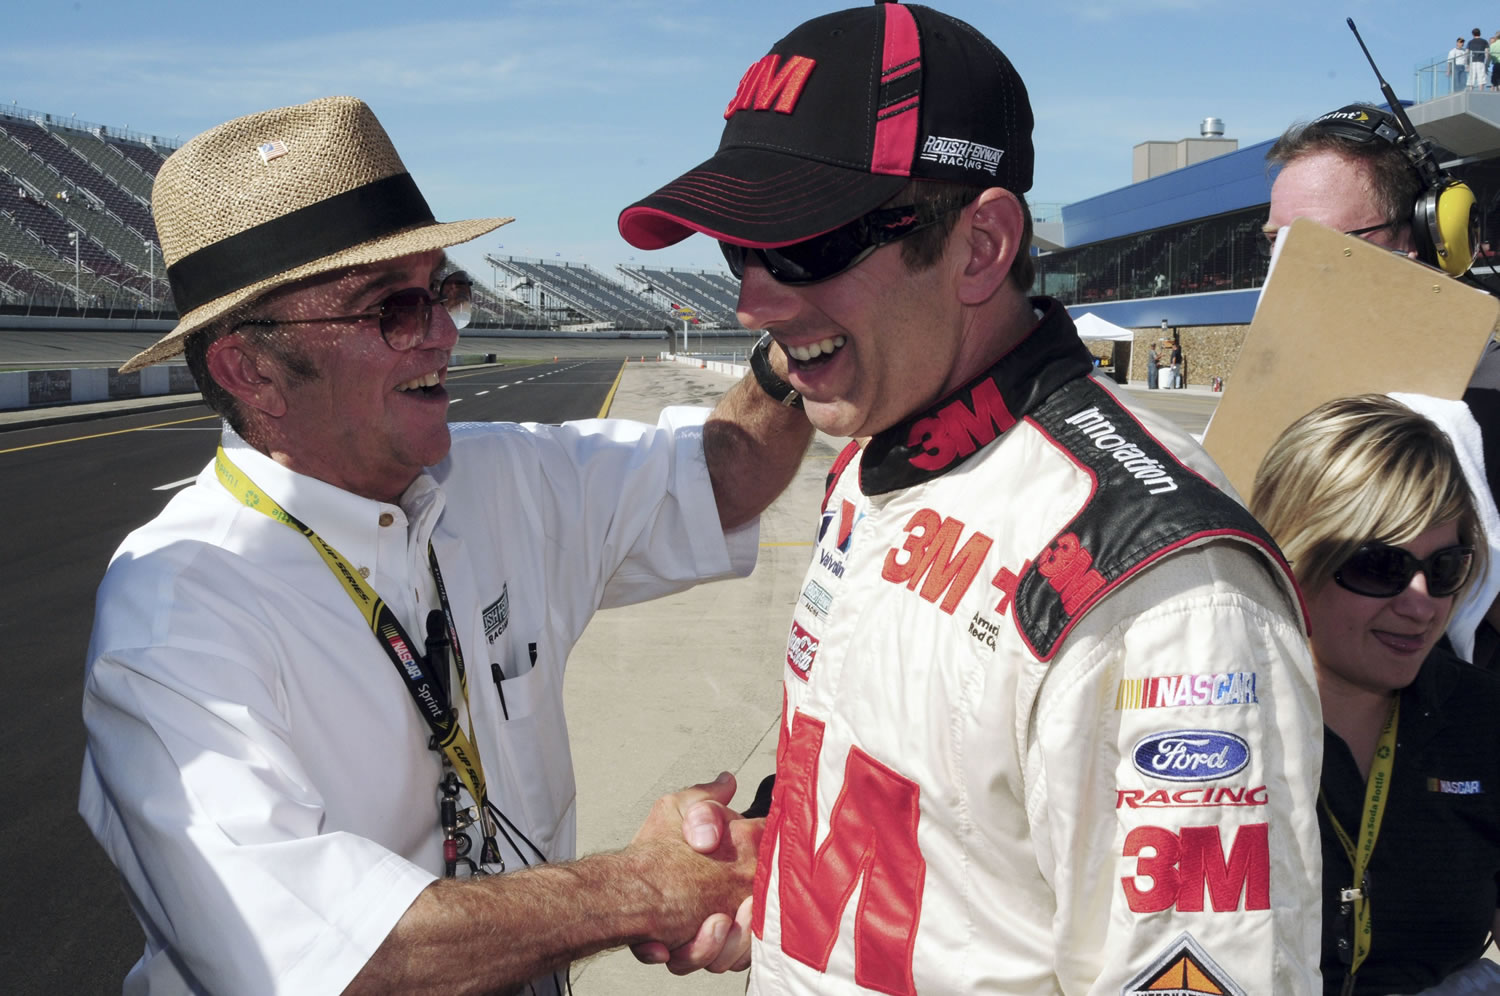 Greg Biffle, right, is congratulated by team owner Jack Roush, left, after winning the pole during qualifications Friday for the NASCAR Sprint Cup Series auto race at Michigan international Speedway on Sunday.